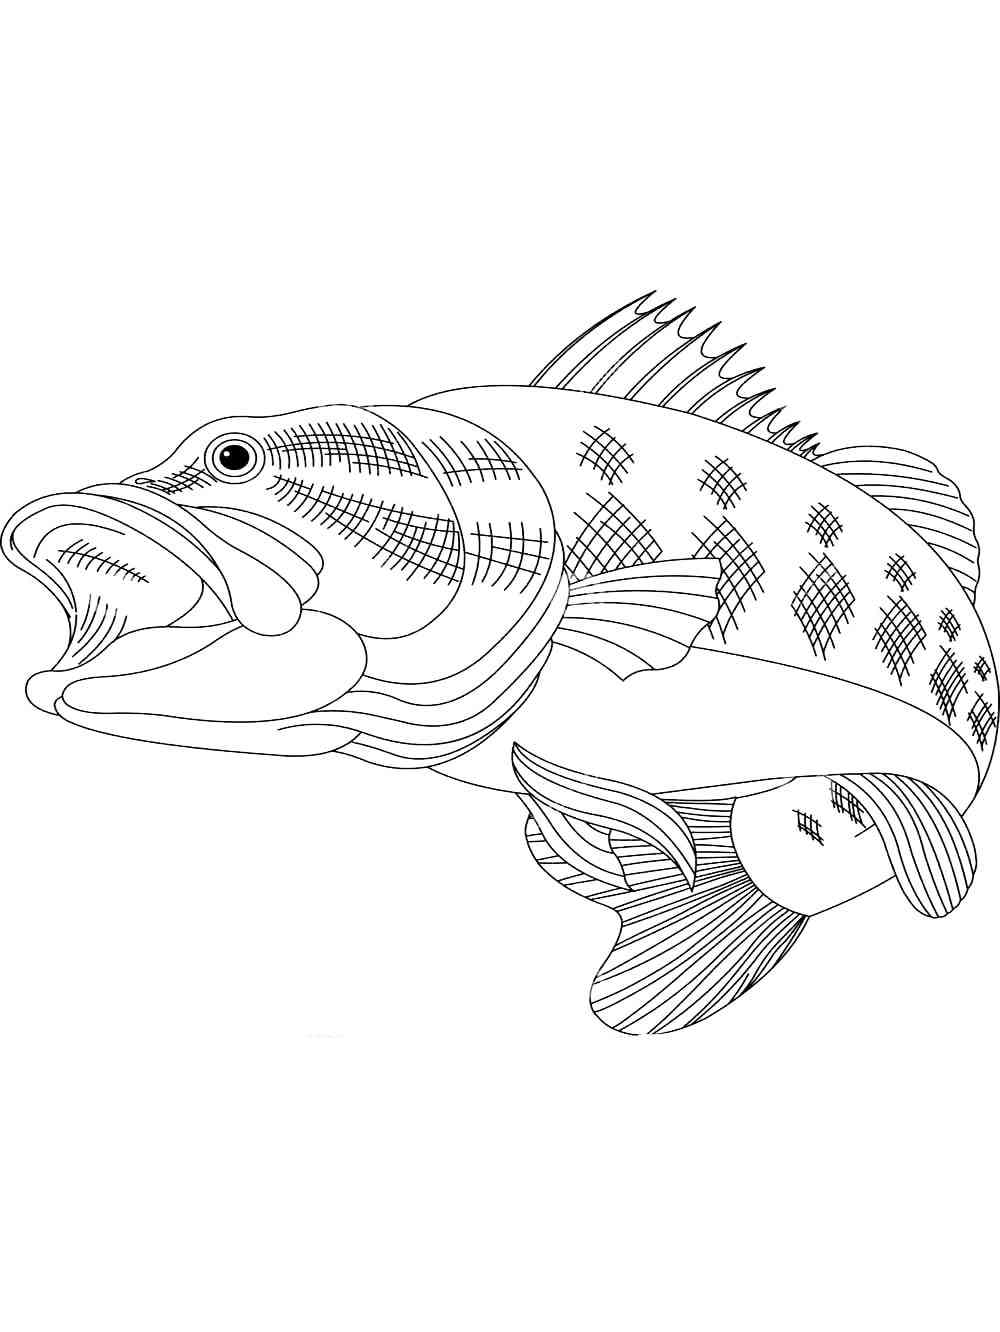 Largemouth Basses coloring page